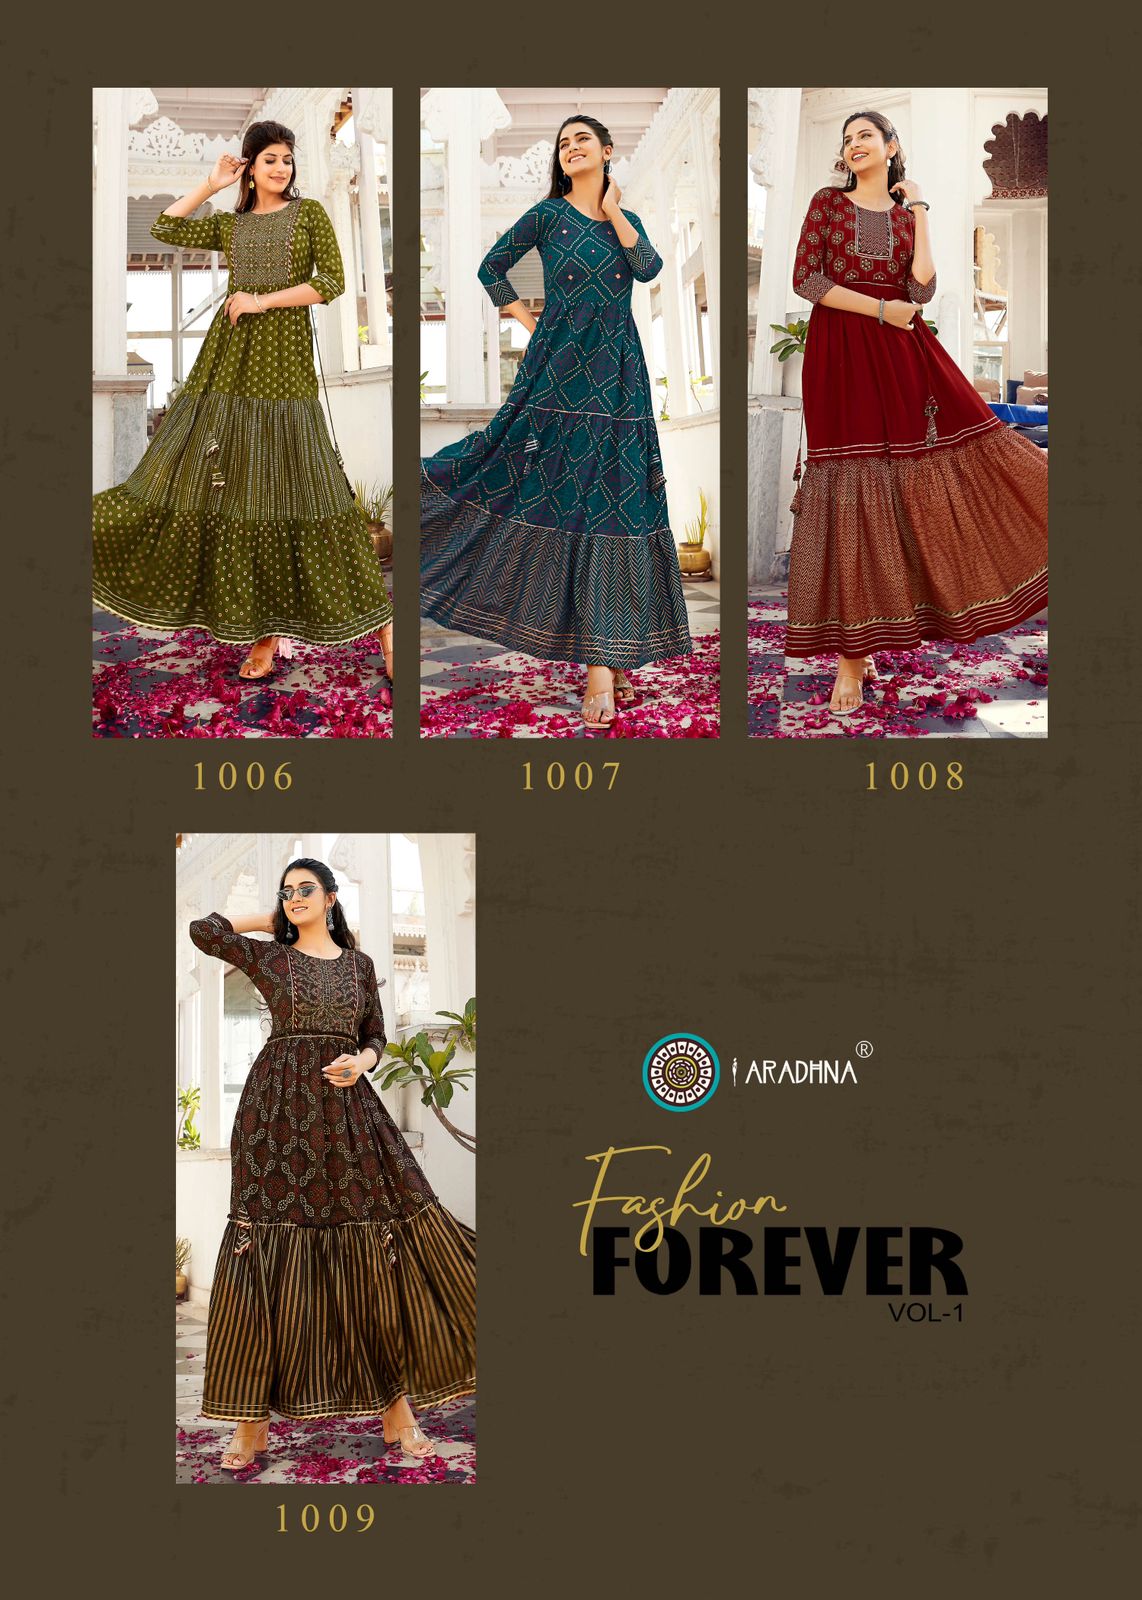 Aradhna Fashion Forever 1 collection 7